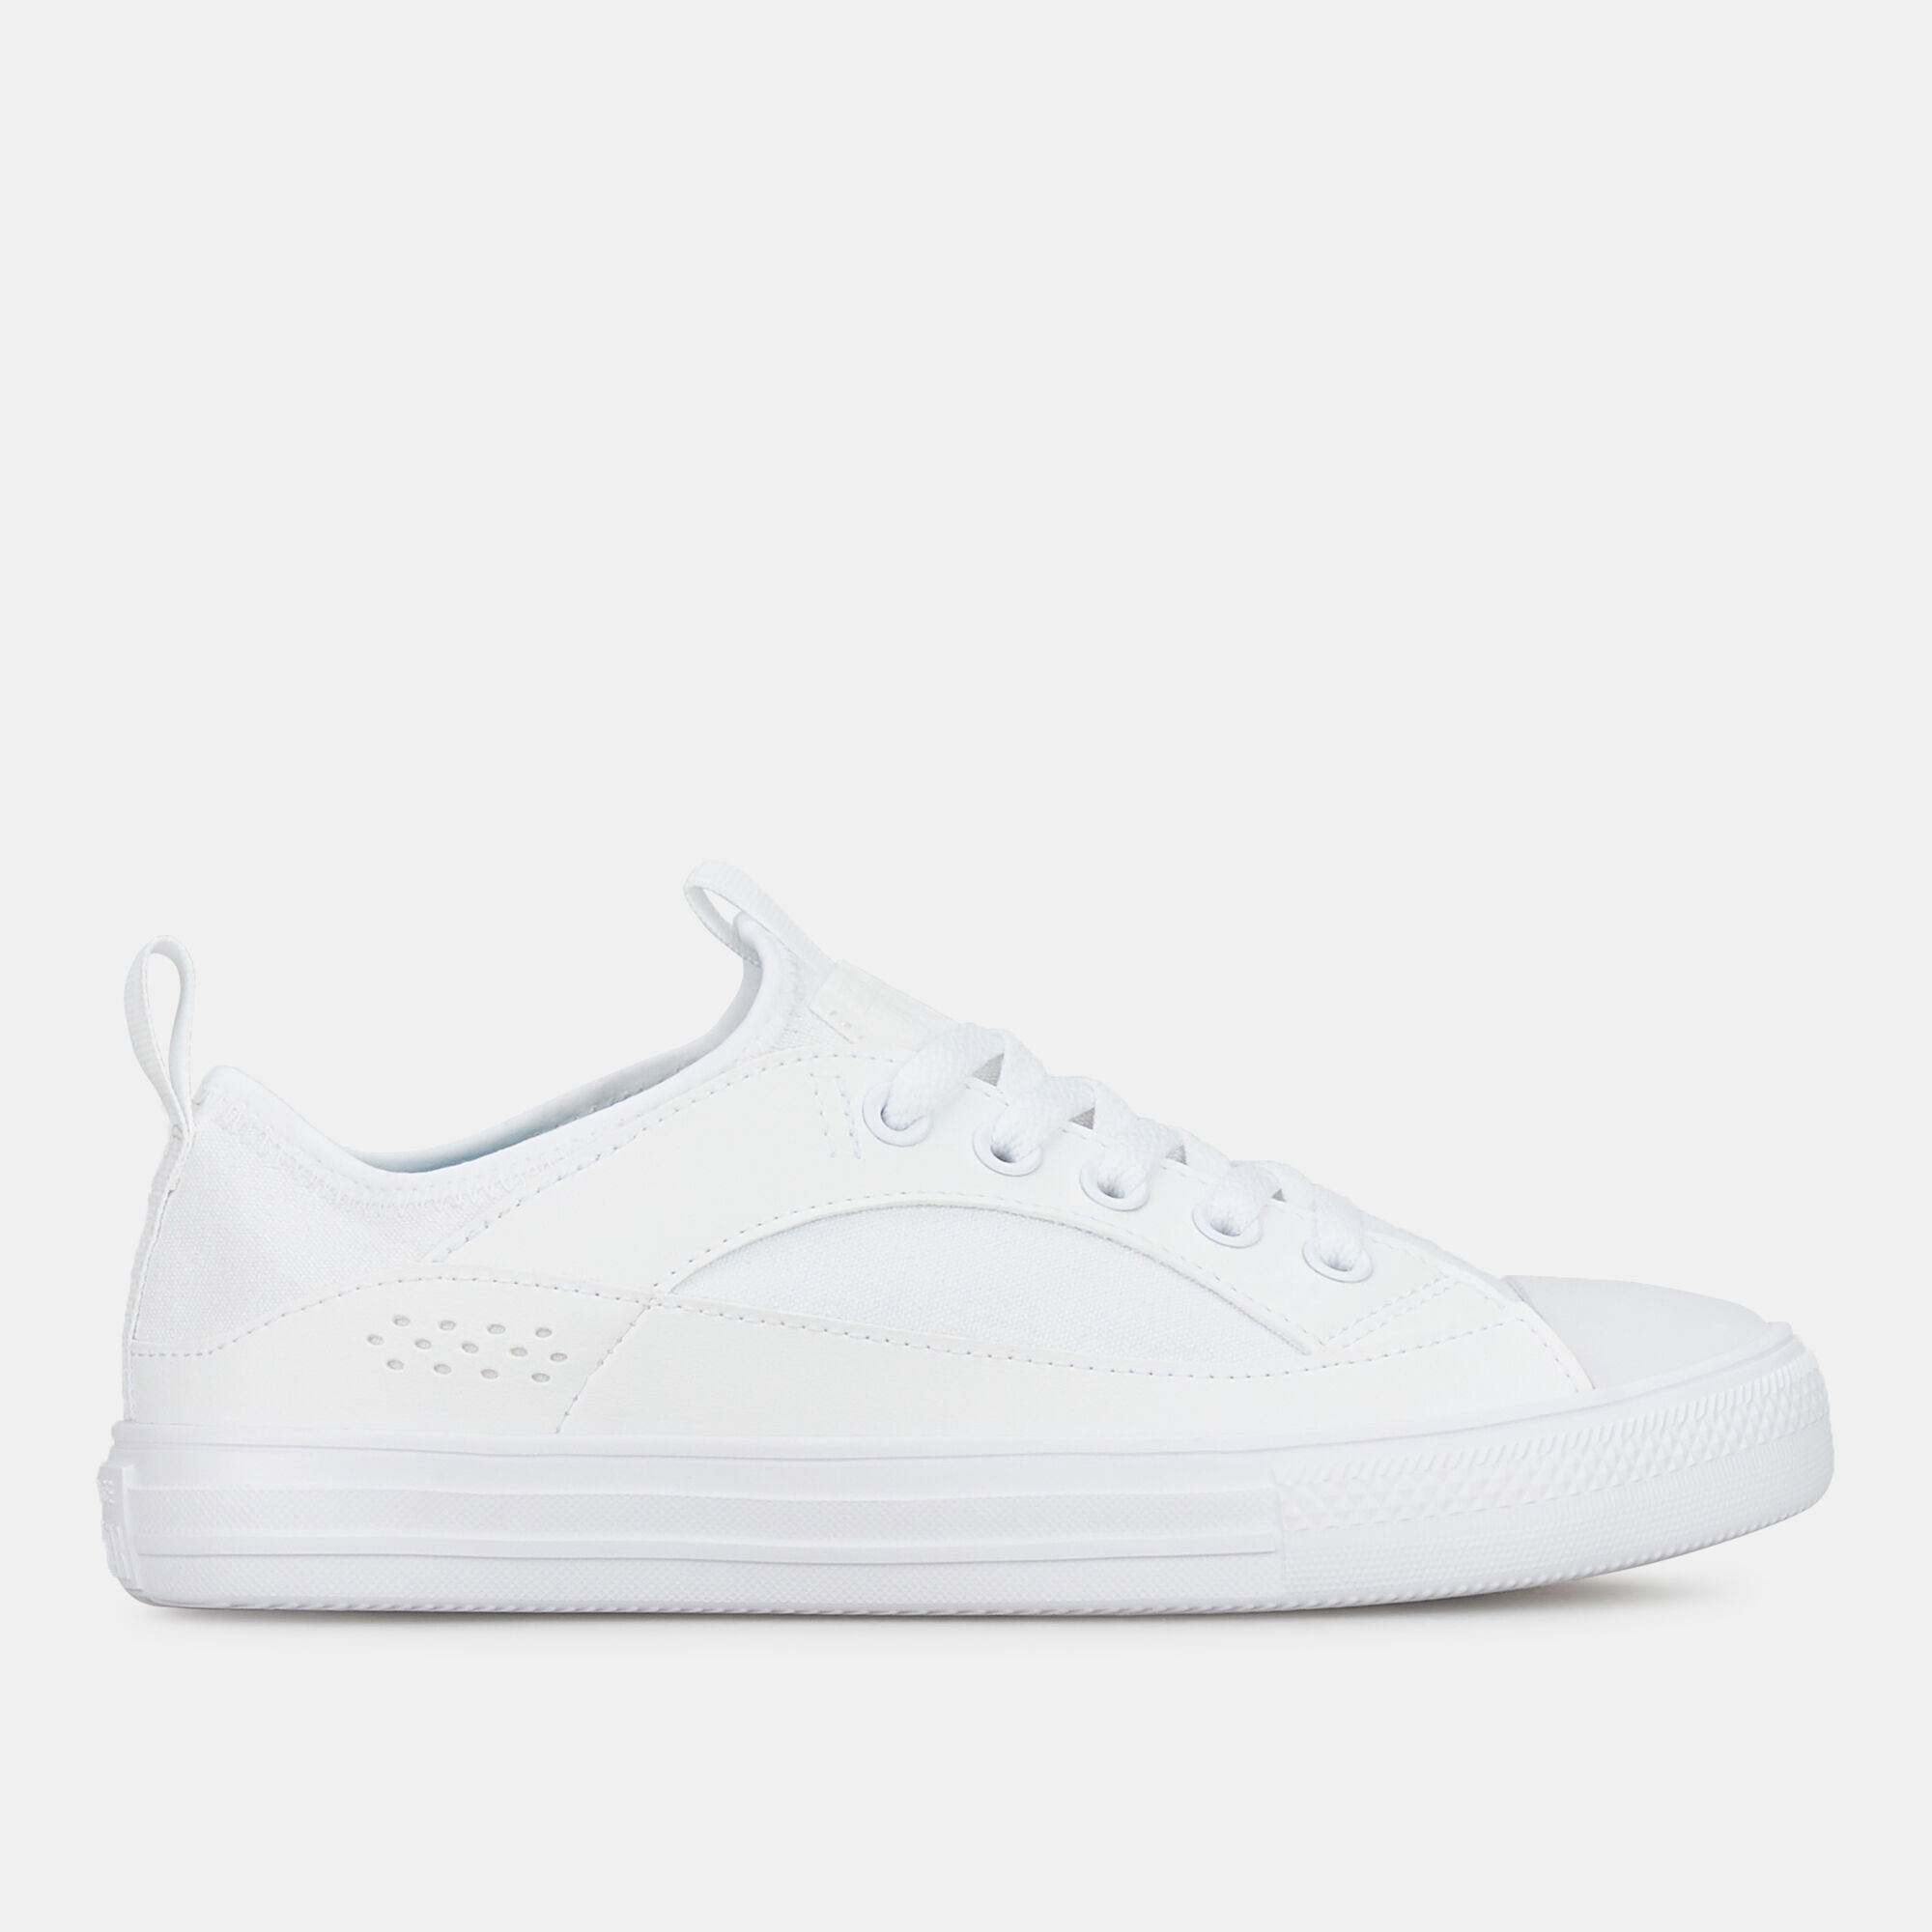 Best sneakers to wear to the office | White Converse Chuck Taylor All Star shoes